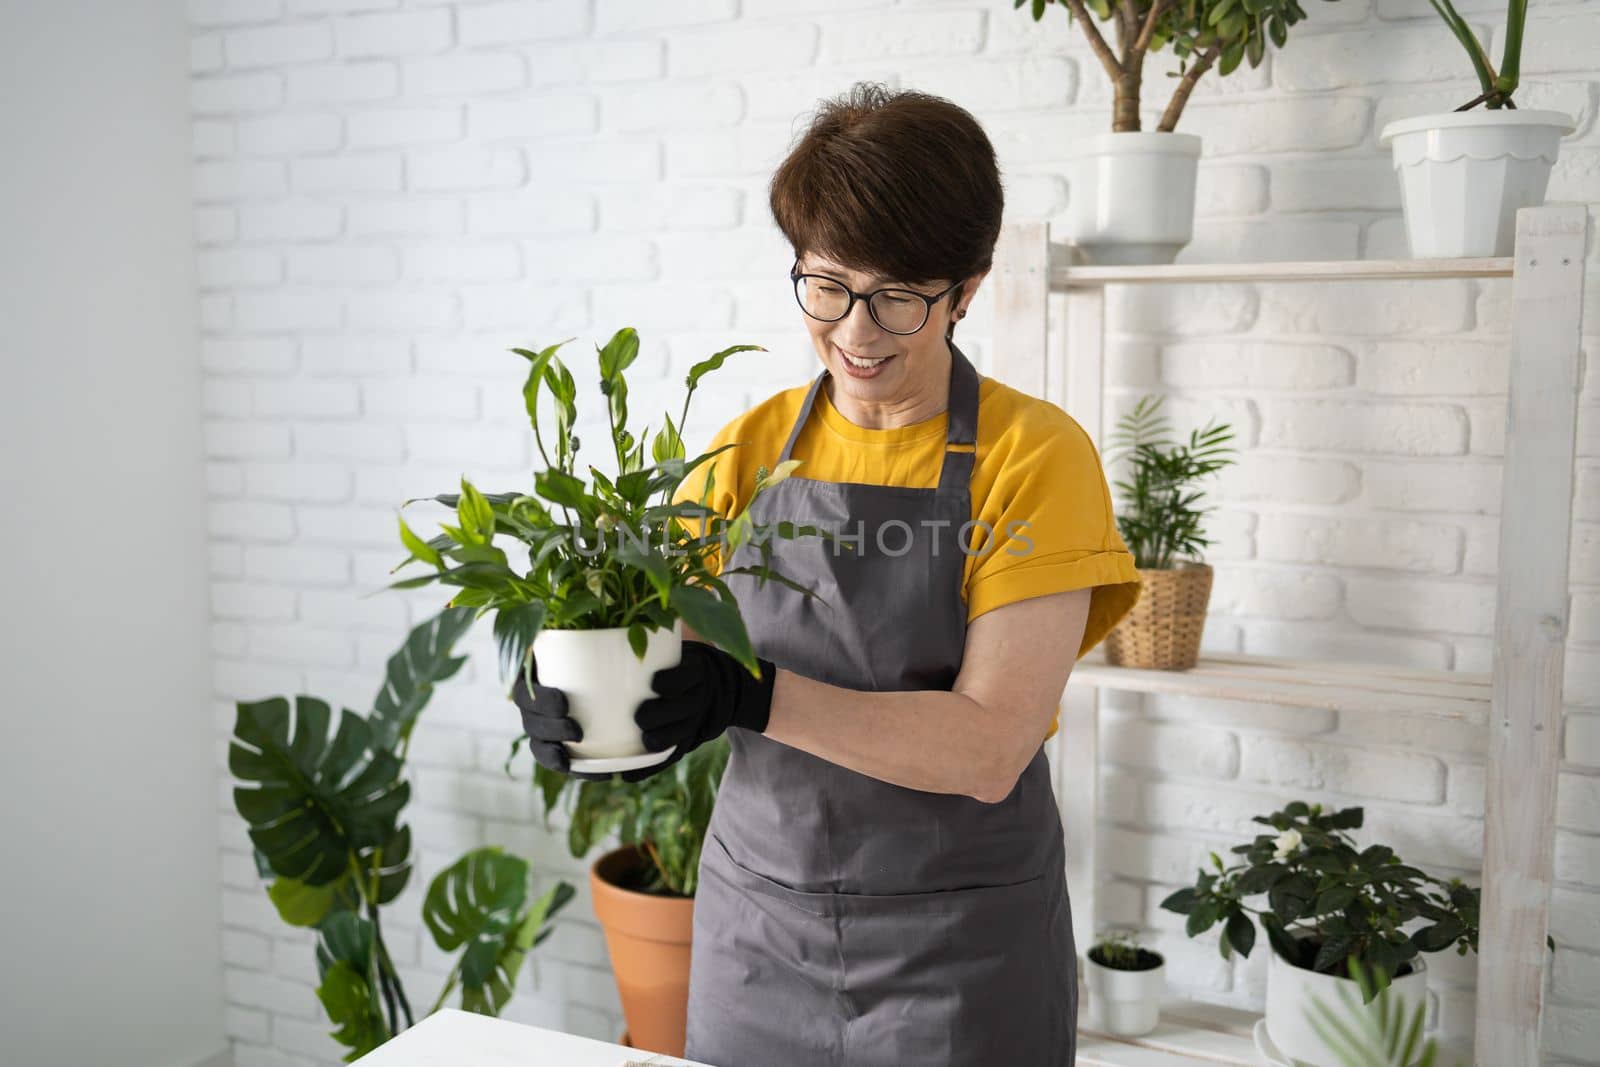 Spring houseplant care, repotting houseplants. Waking up indoor plants for spring. Middle aged woman is transplanting plant into new pot at home. Gardener transplant plant Spathiphyllum by Satura86